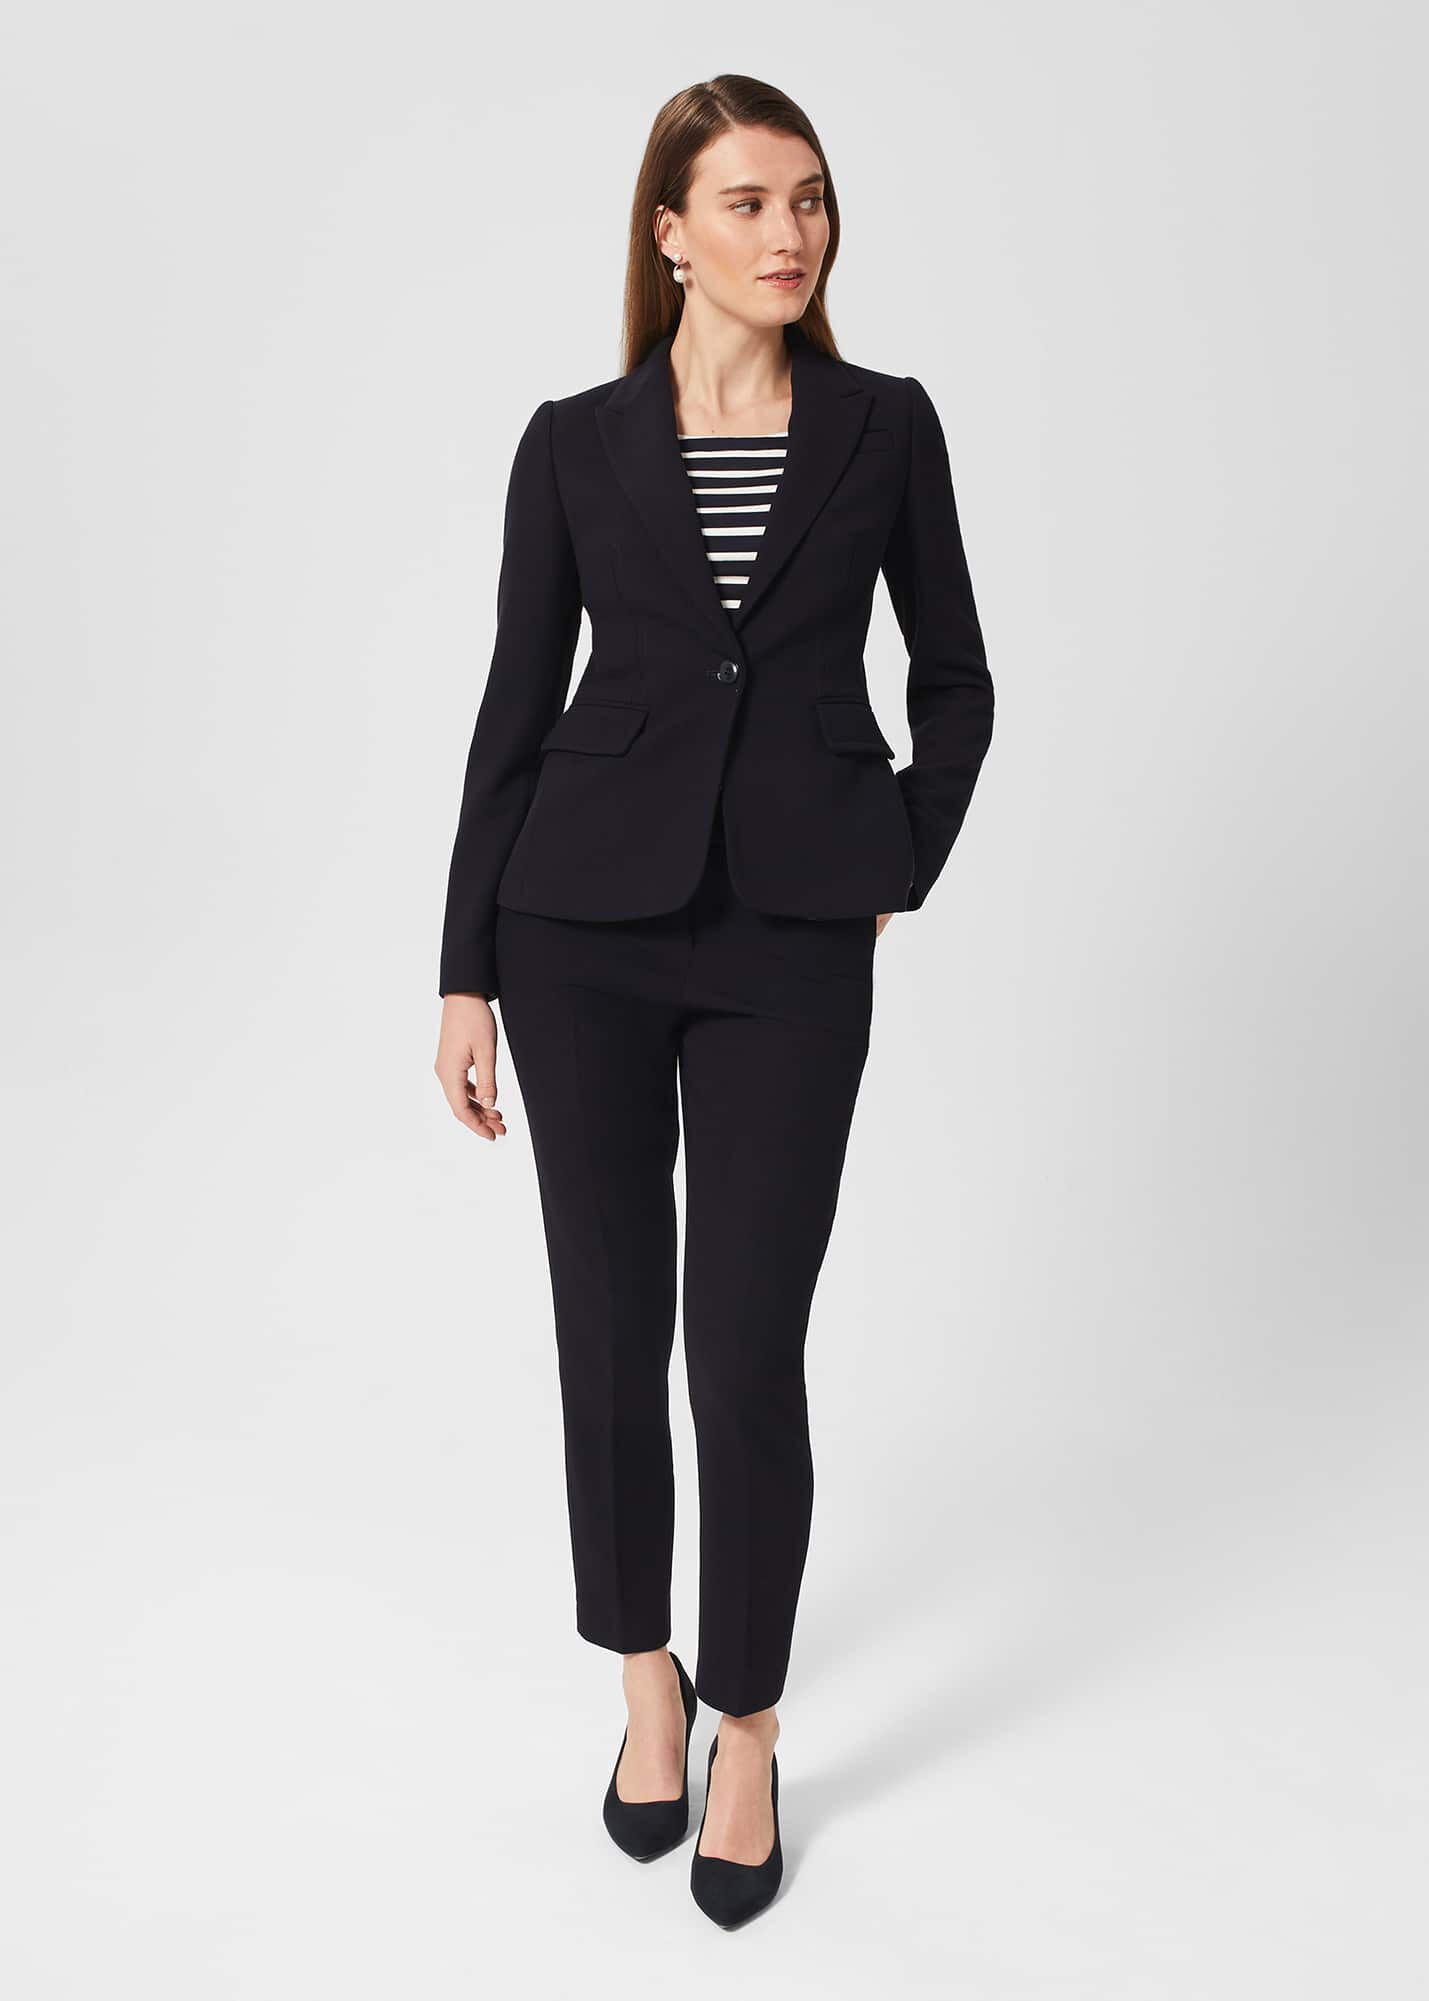 SUSIELADY Women's Blazer Suits Two Piece Solid Work Pant Suit India | Ubuy